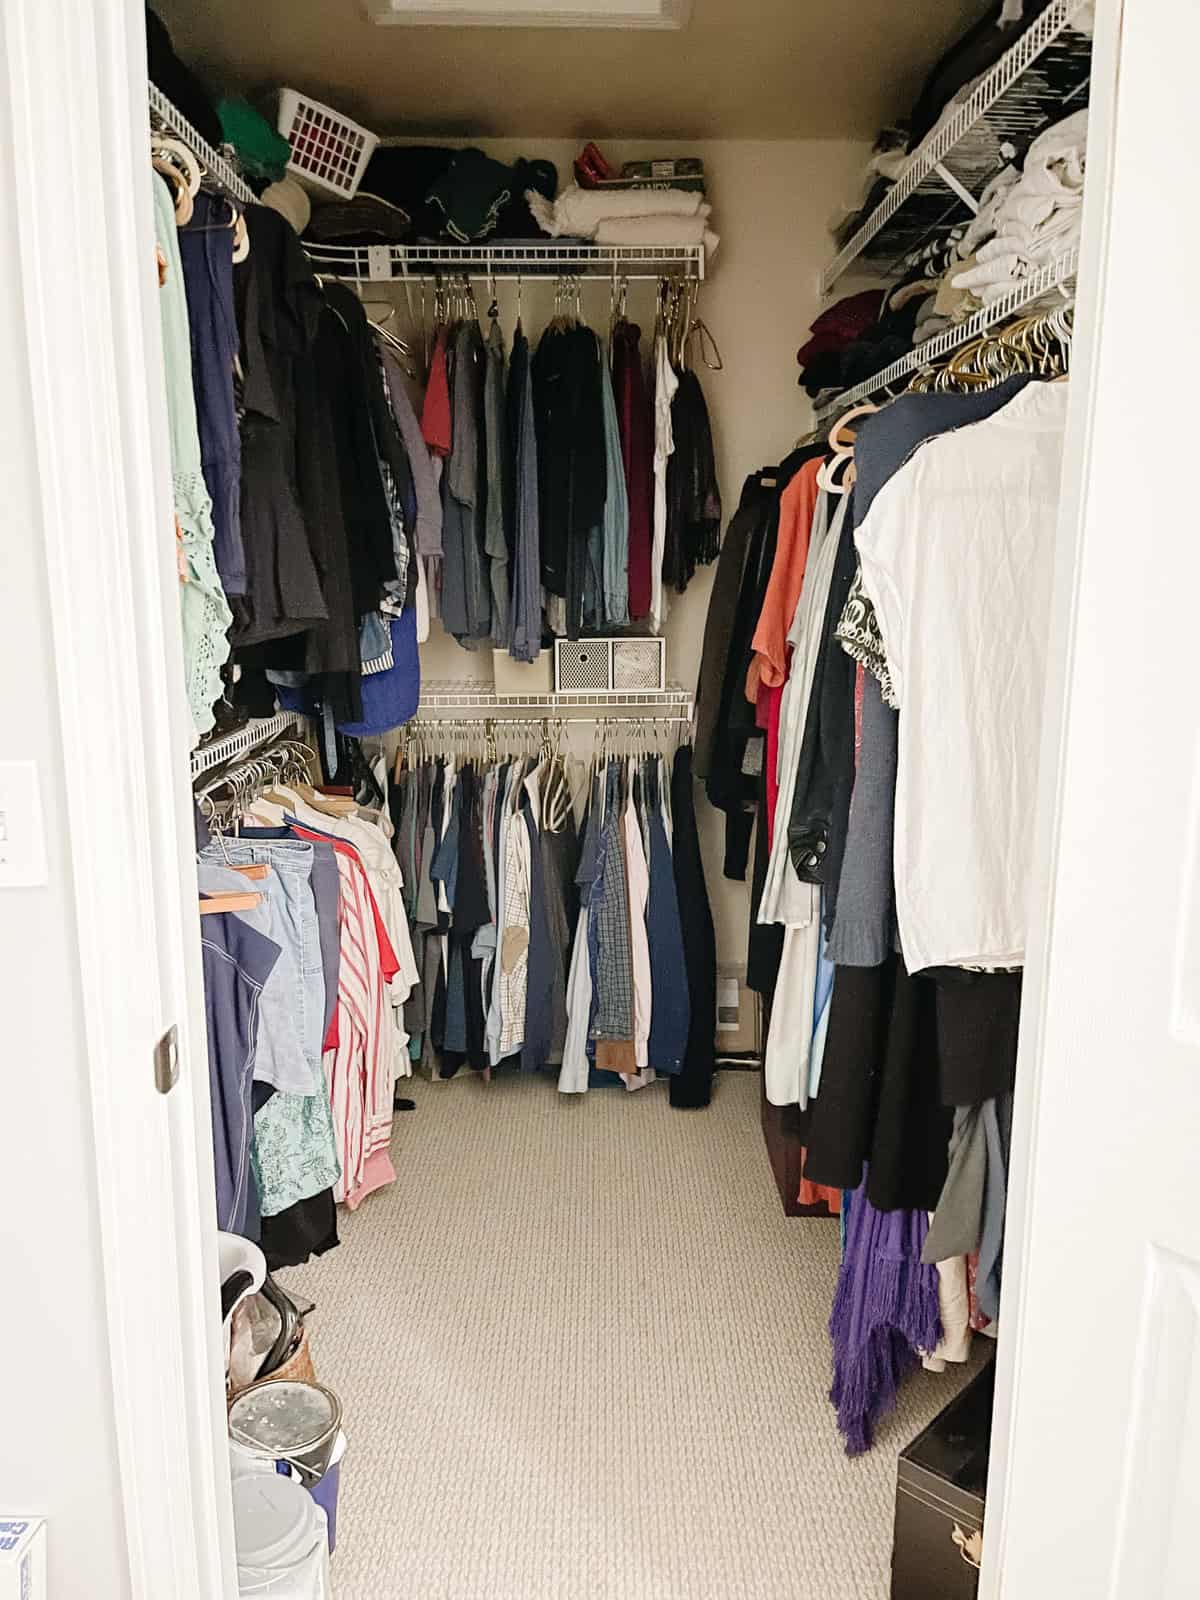 walk in closet stuffed with clothing in need of organization